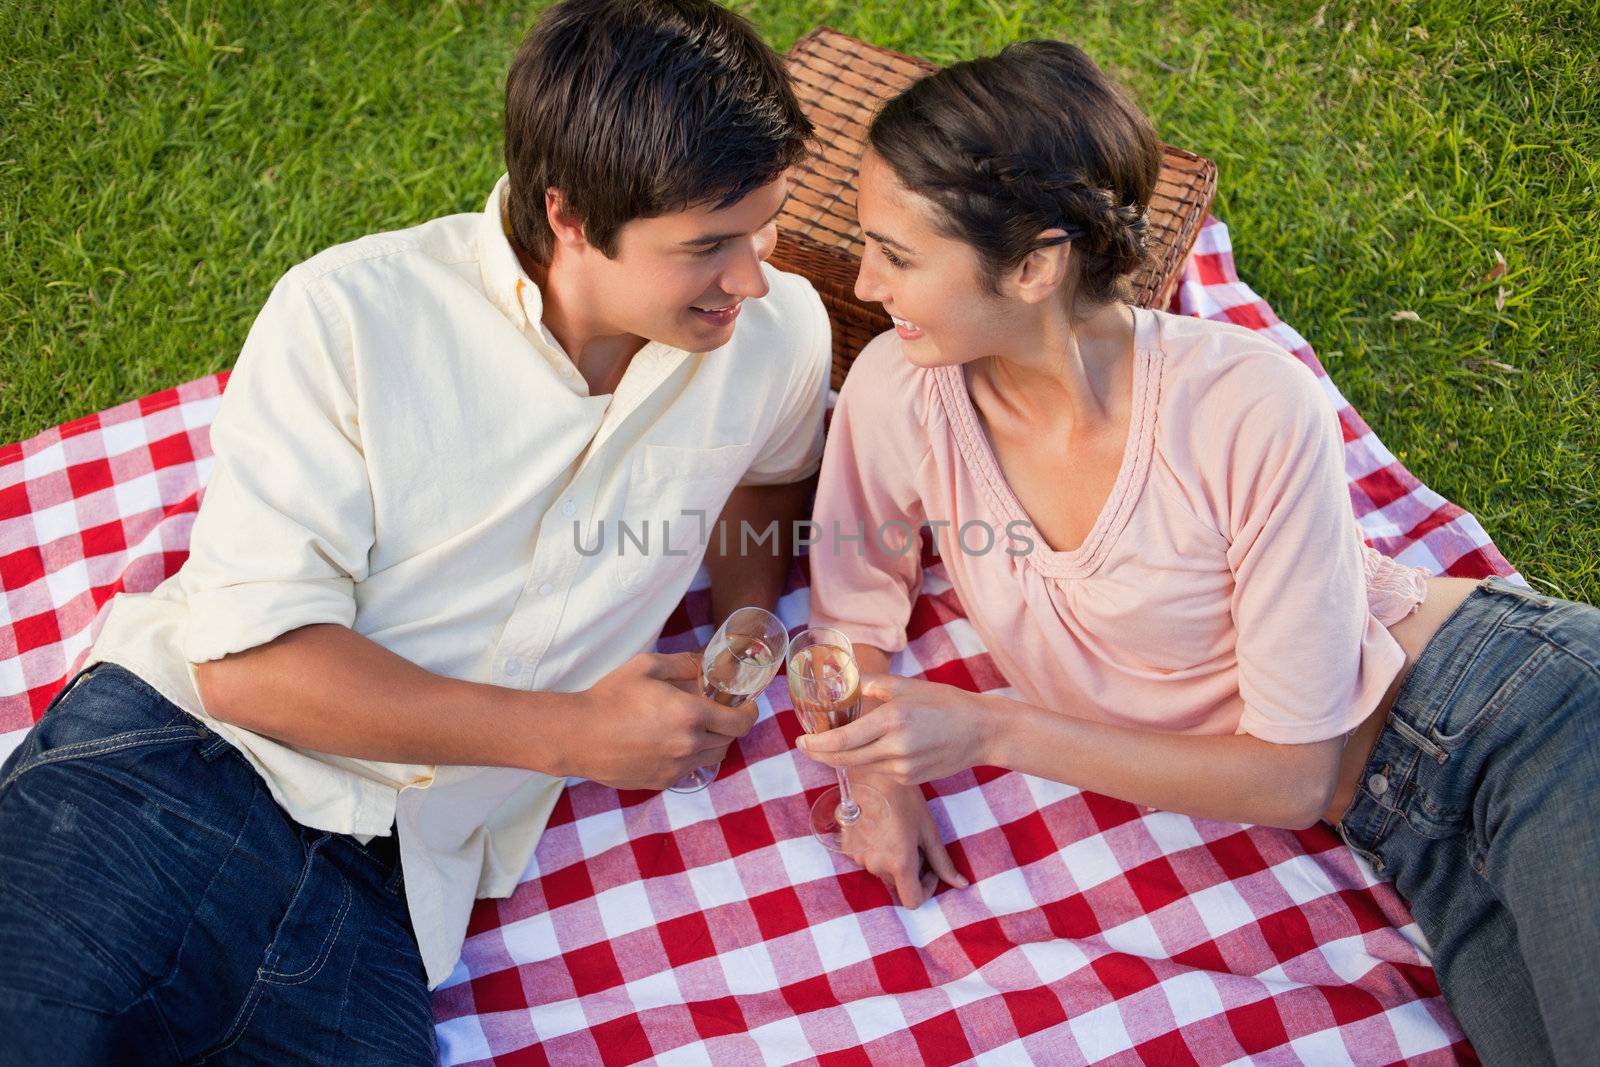 Man and a woman looking at each other while smiling and holding glasses of champagne during a picnic